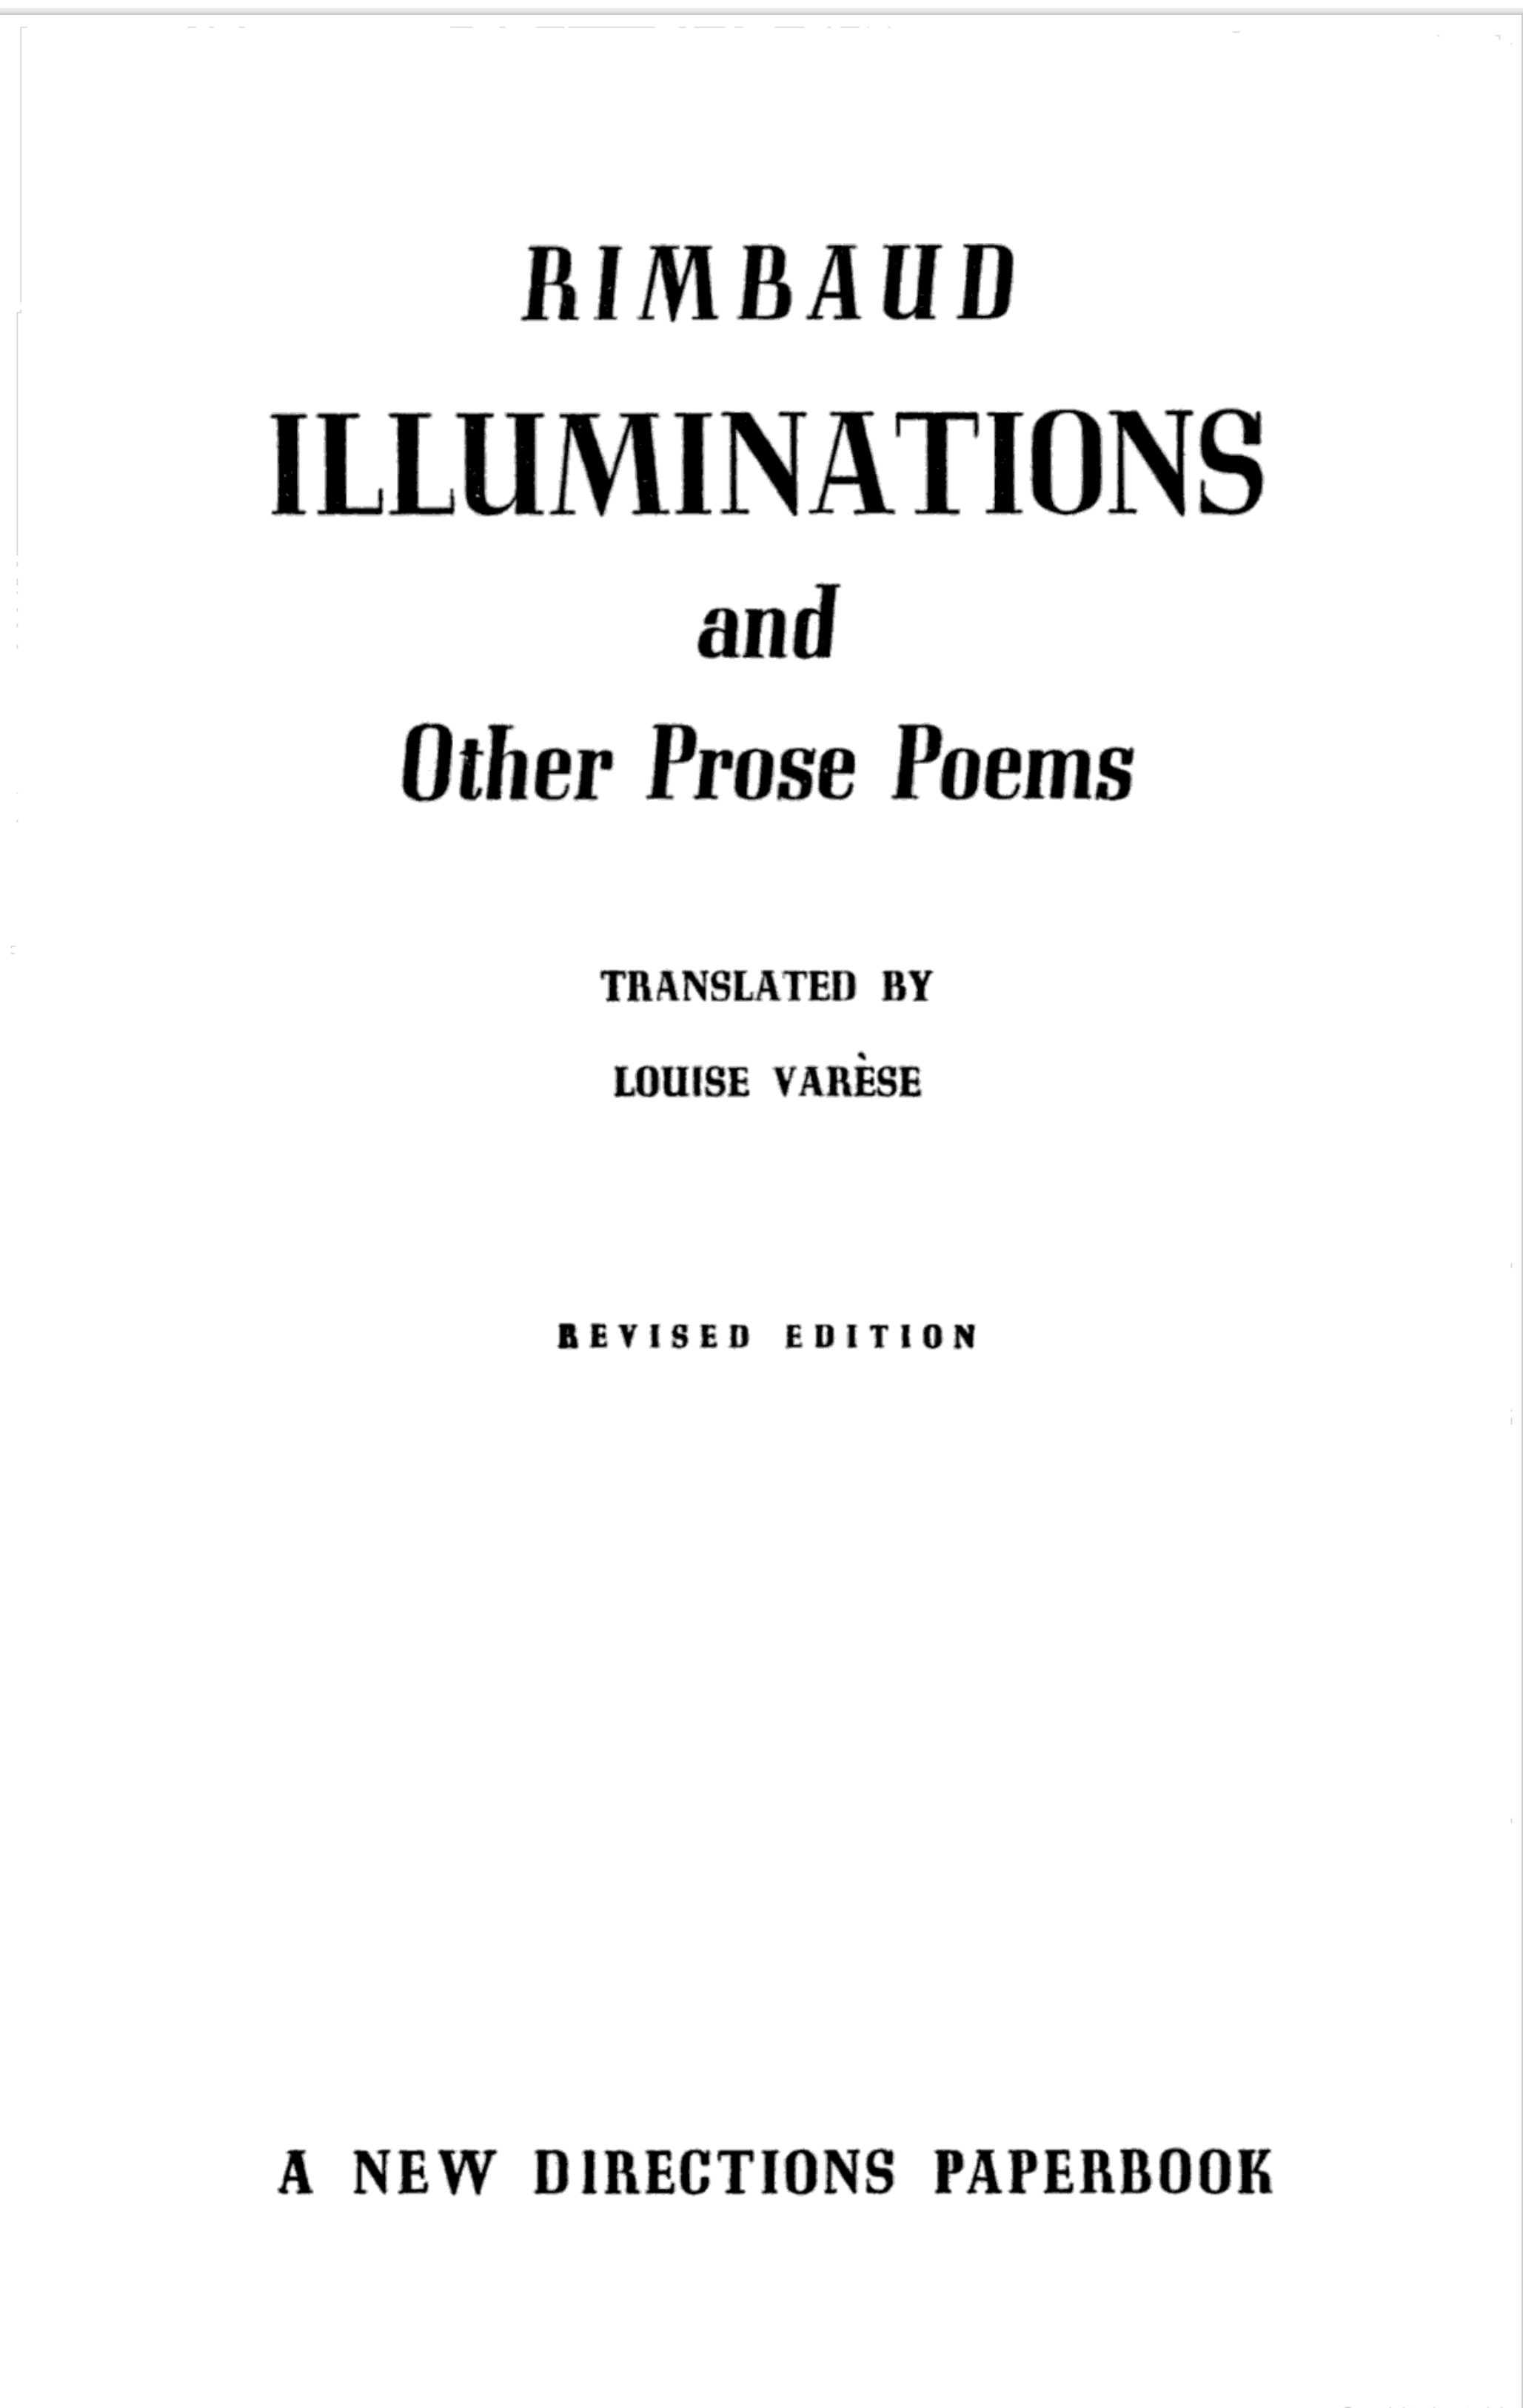 Title page of Arthur Rimbaud's Illuminations and Other Prose Poems